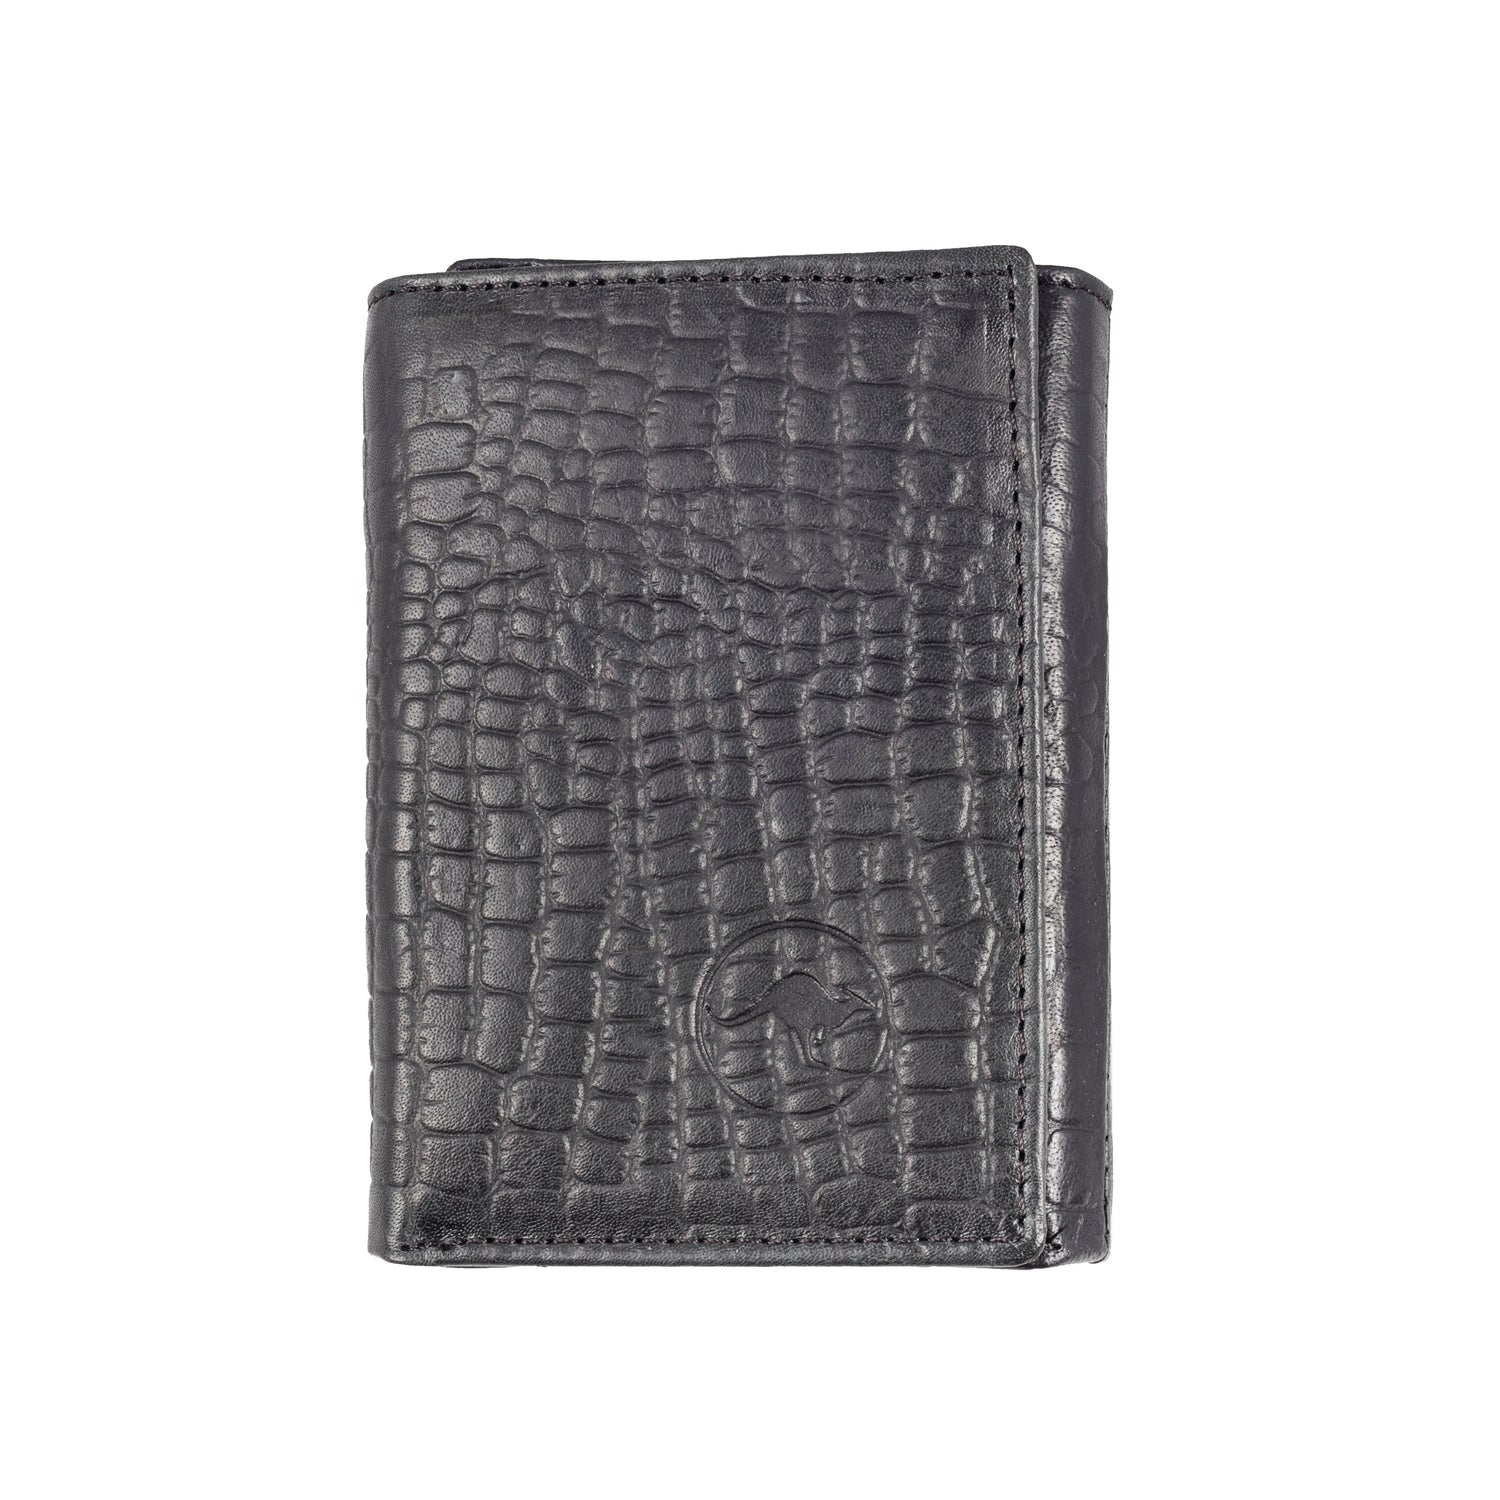 Two Fold Black Classic Leather Wallet, embossed crocodile print. Available in Single or Double Fold styles. Real deal, tough kangaroo leather, slim design for any pocket.